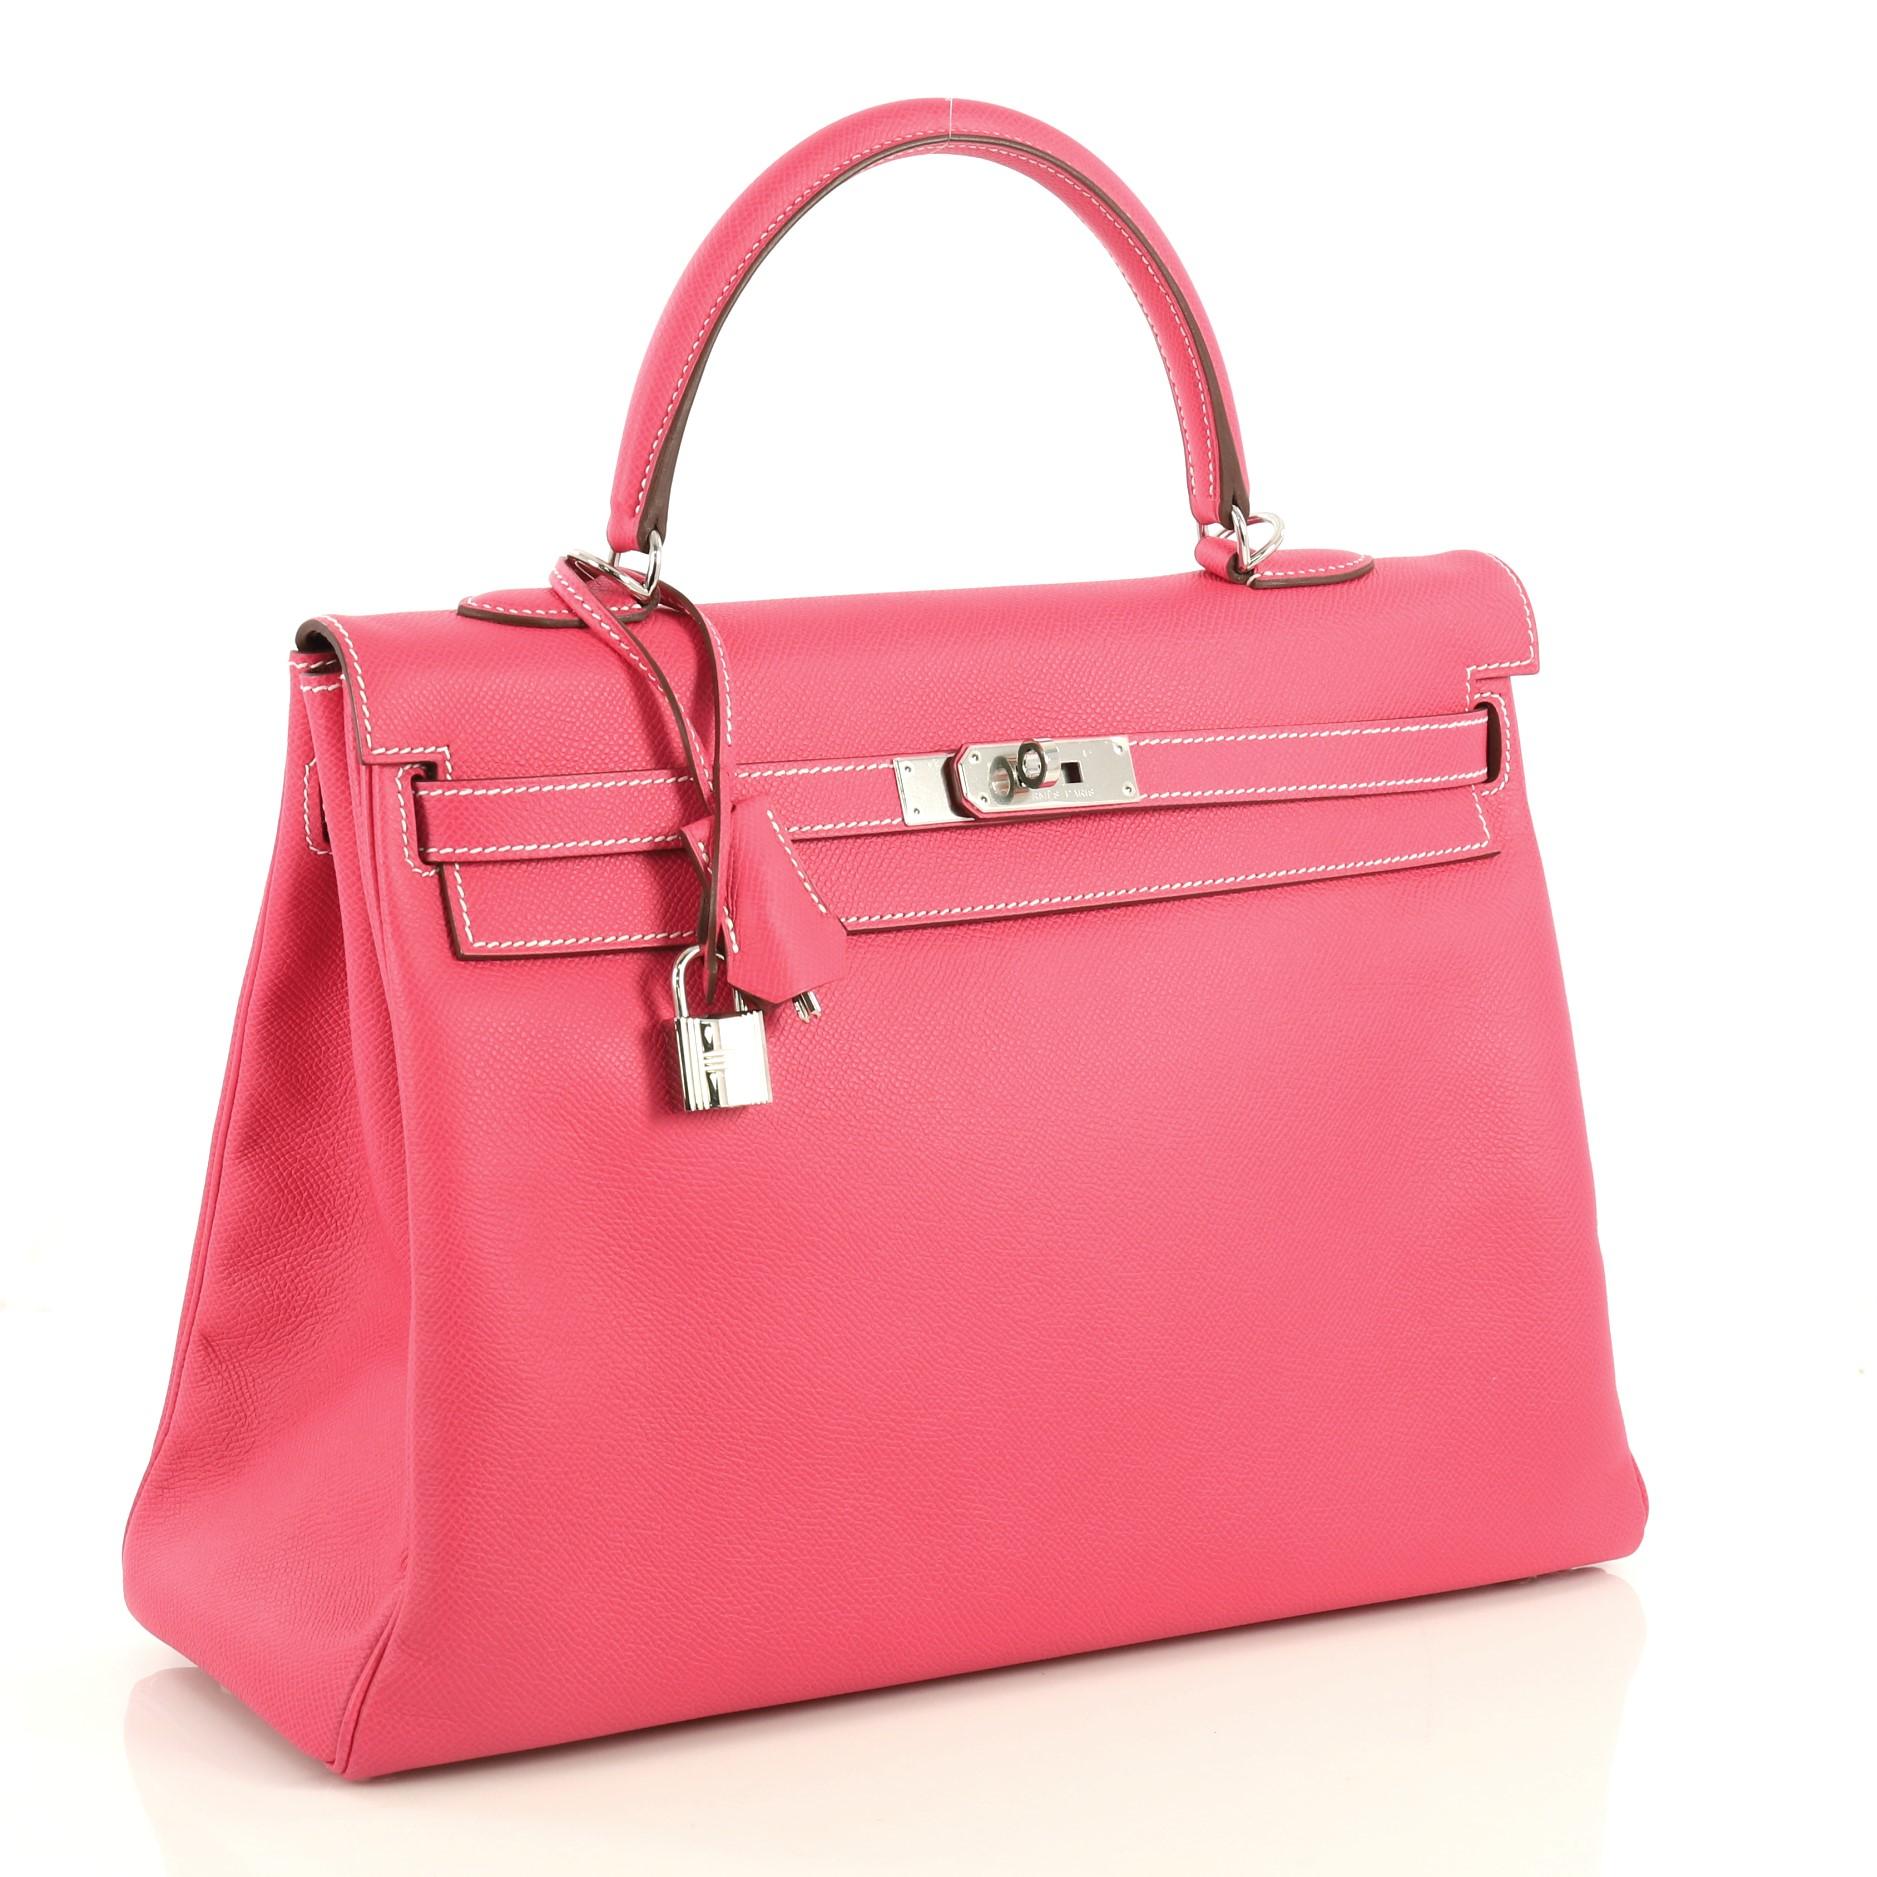 This Hermes Candy Kelly Handbag Epsom 35, crafted from Rose Tyrien pink Epsom leather, features a single rolled top handle, frontal flap, protective base studs, and palladium hardware. Its turn-lock closure opens to a Rubis Chevre leather interior